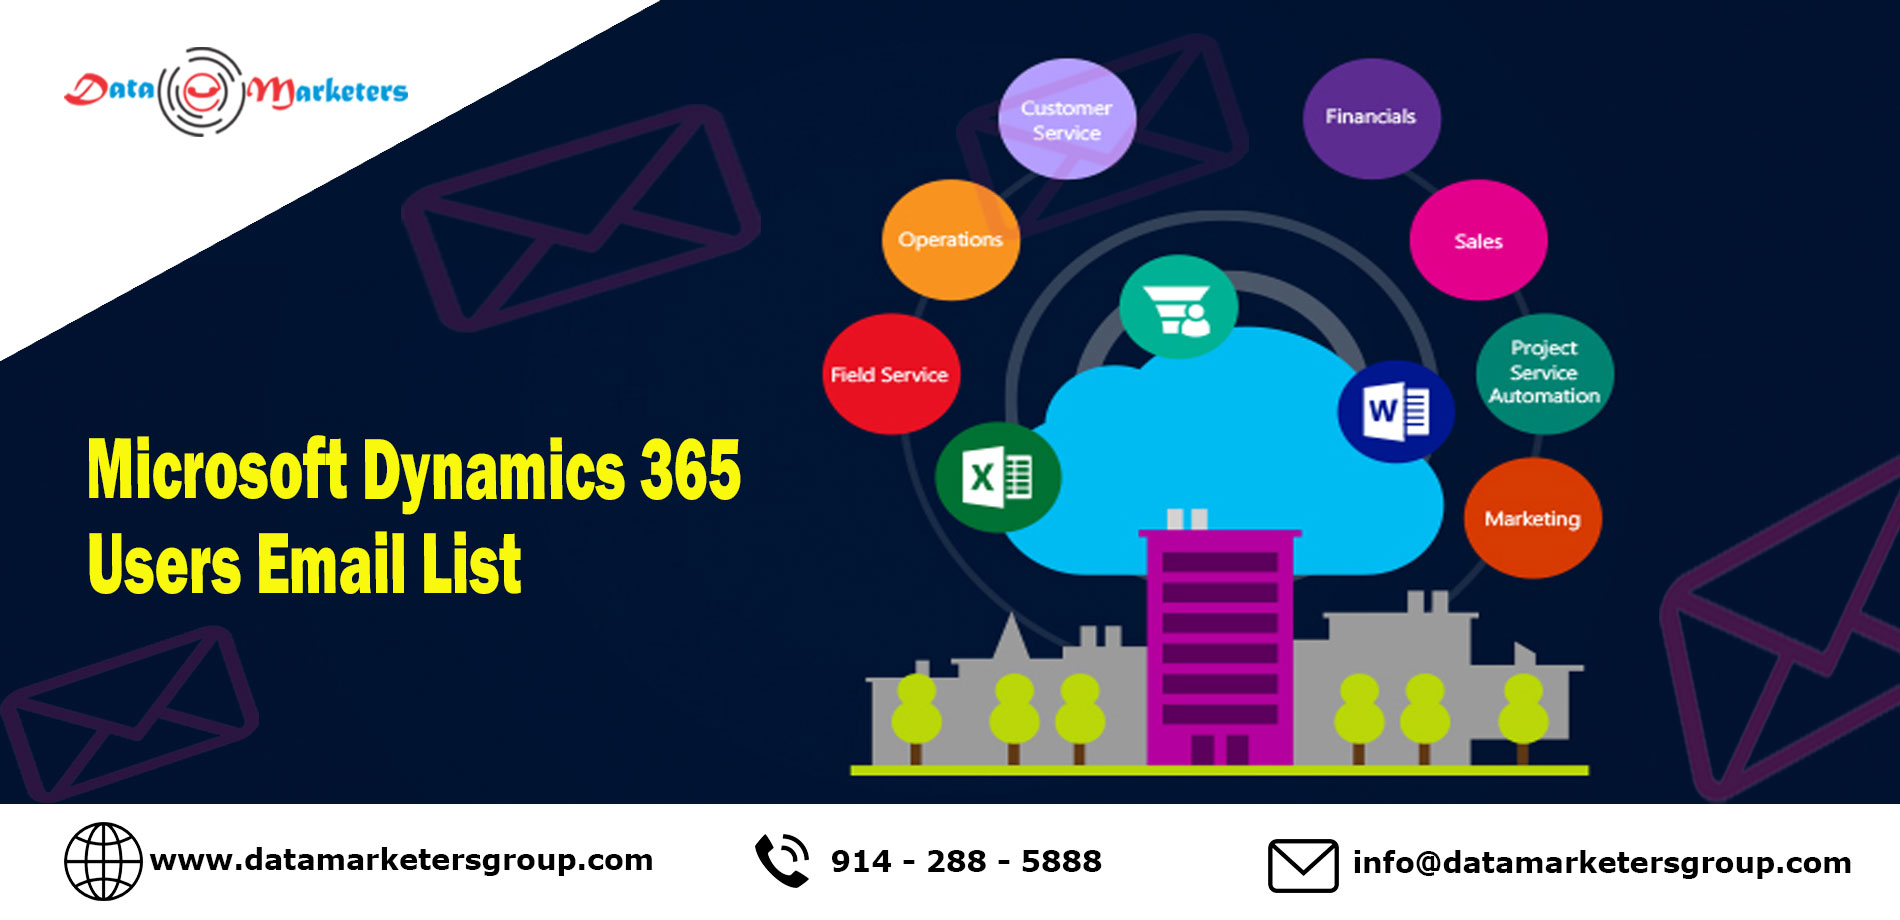 Microsoft Dynamics 365 Users Email List | Data Marketers Group